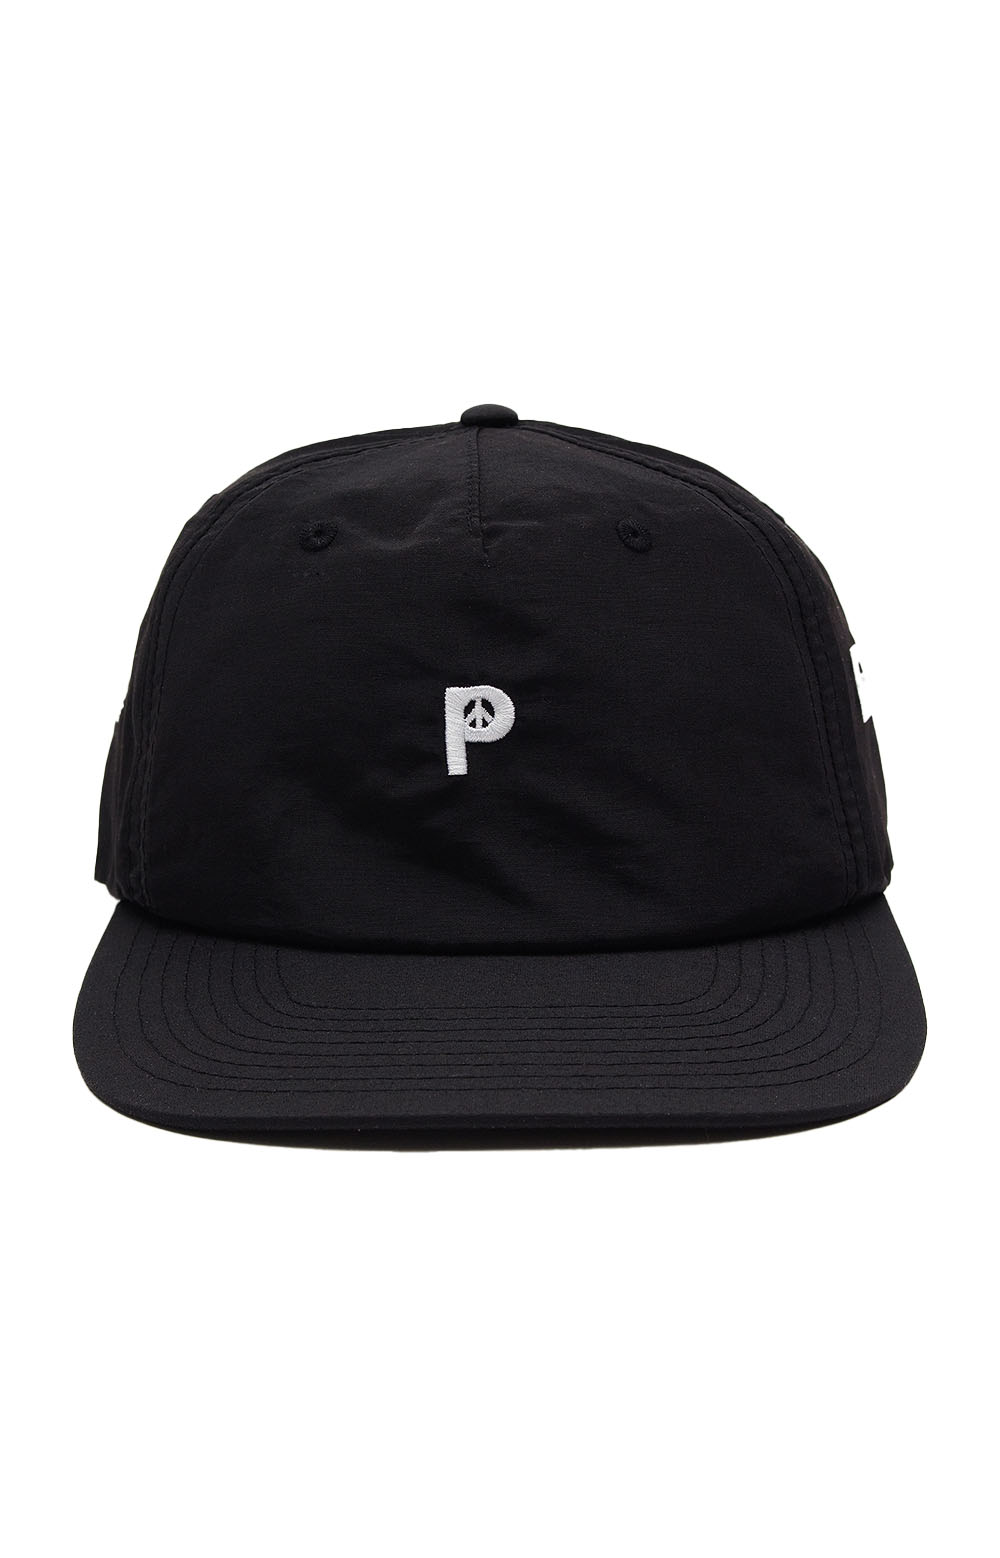 All-Around Peace Strap-Back Hat